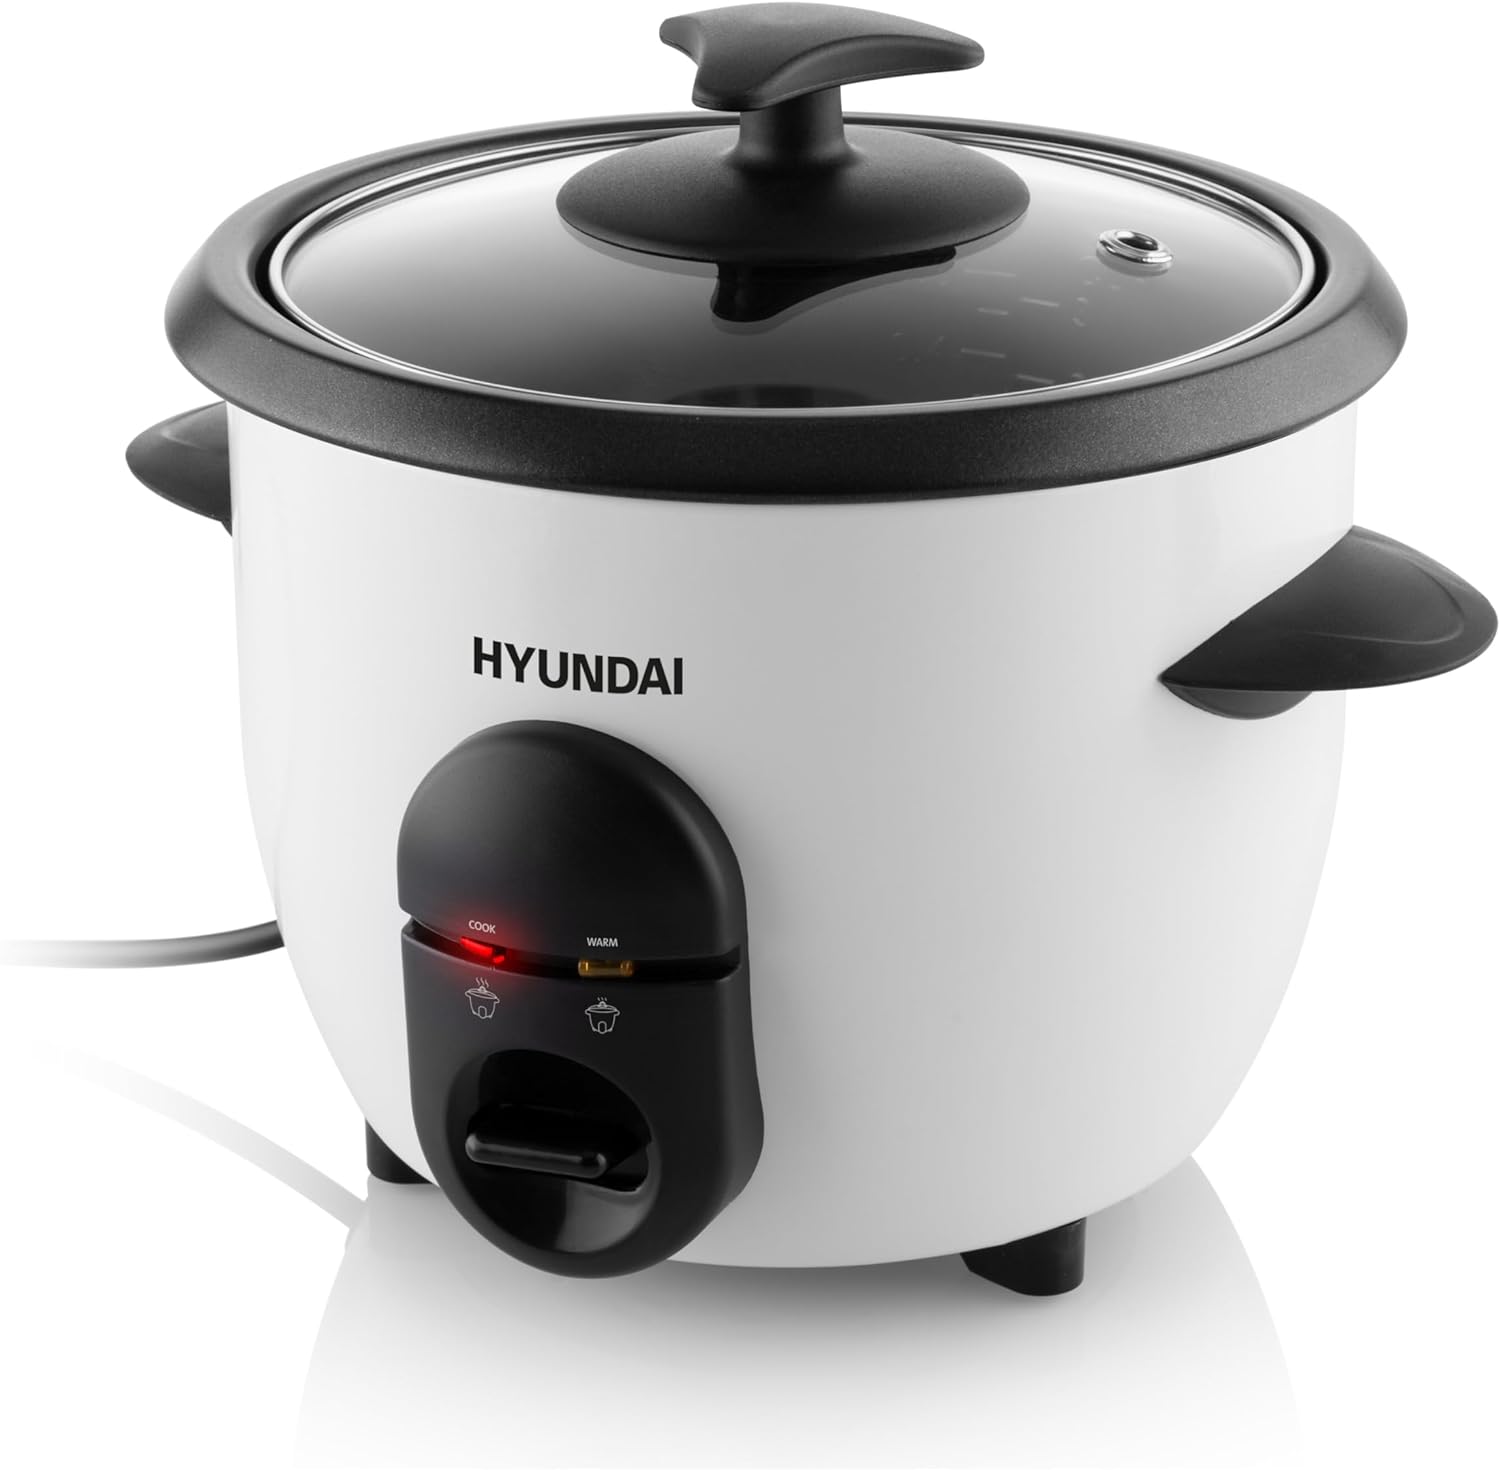 Hyundai RC060 Rice Cooker, 0.6 L for 450 G Rice, 335 W, Rice Warmer, Warming Function, non-stick Coated Garden Pot, Rice Spoon & Measuring Cup